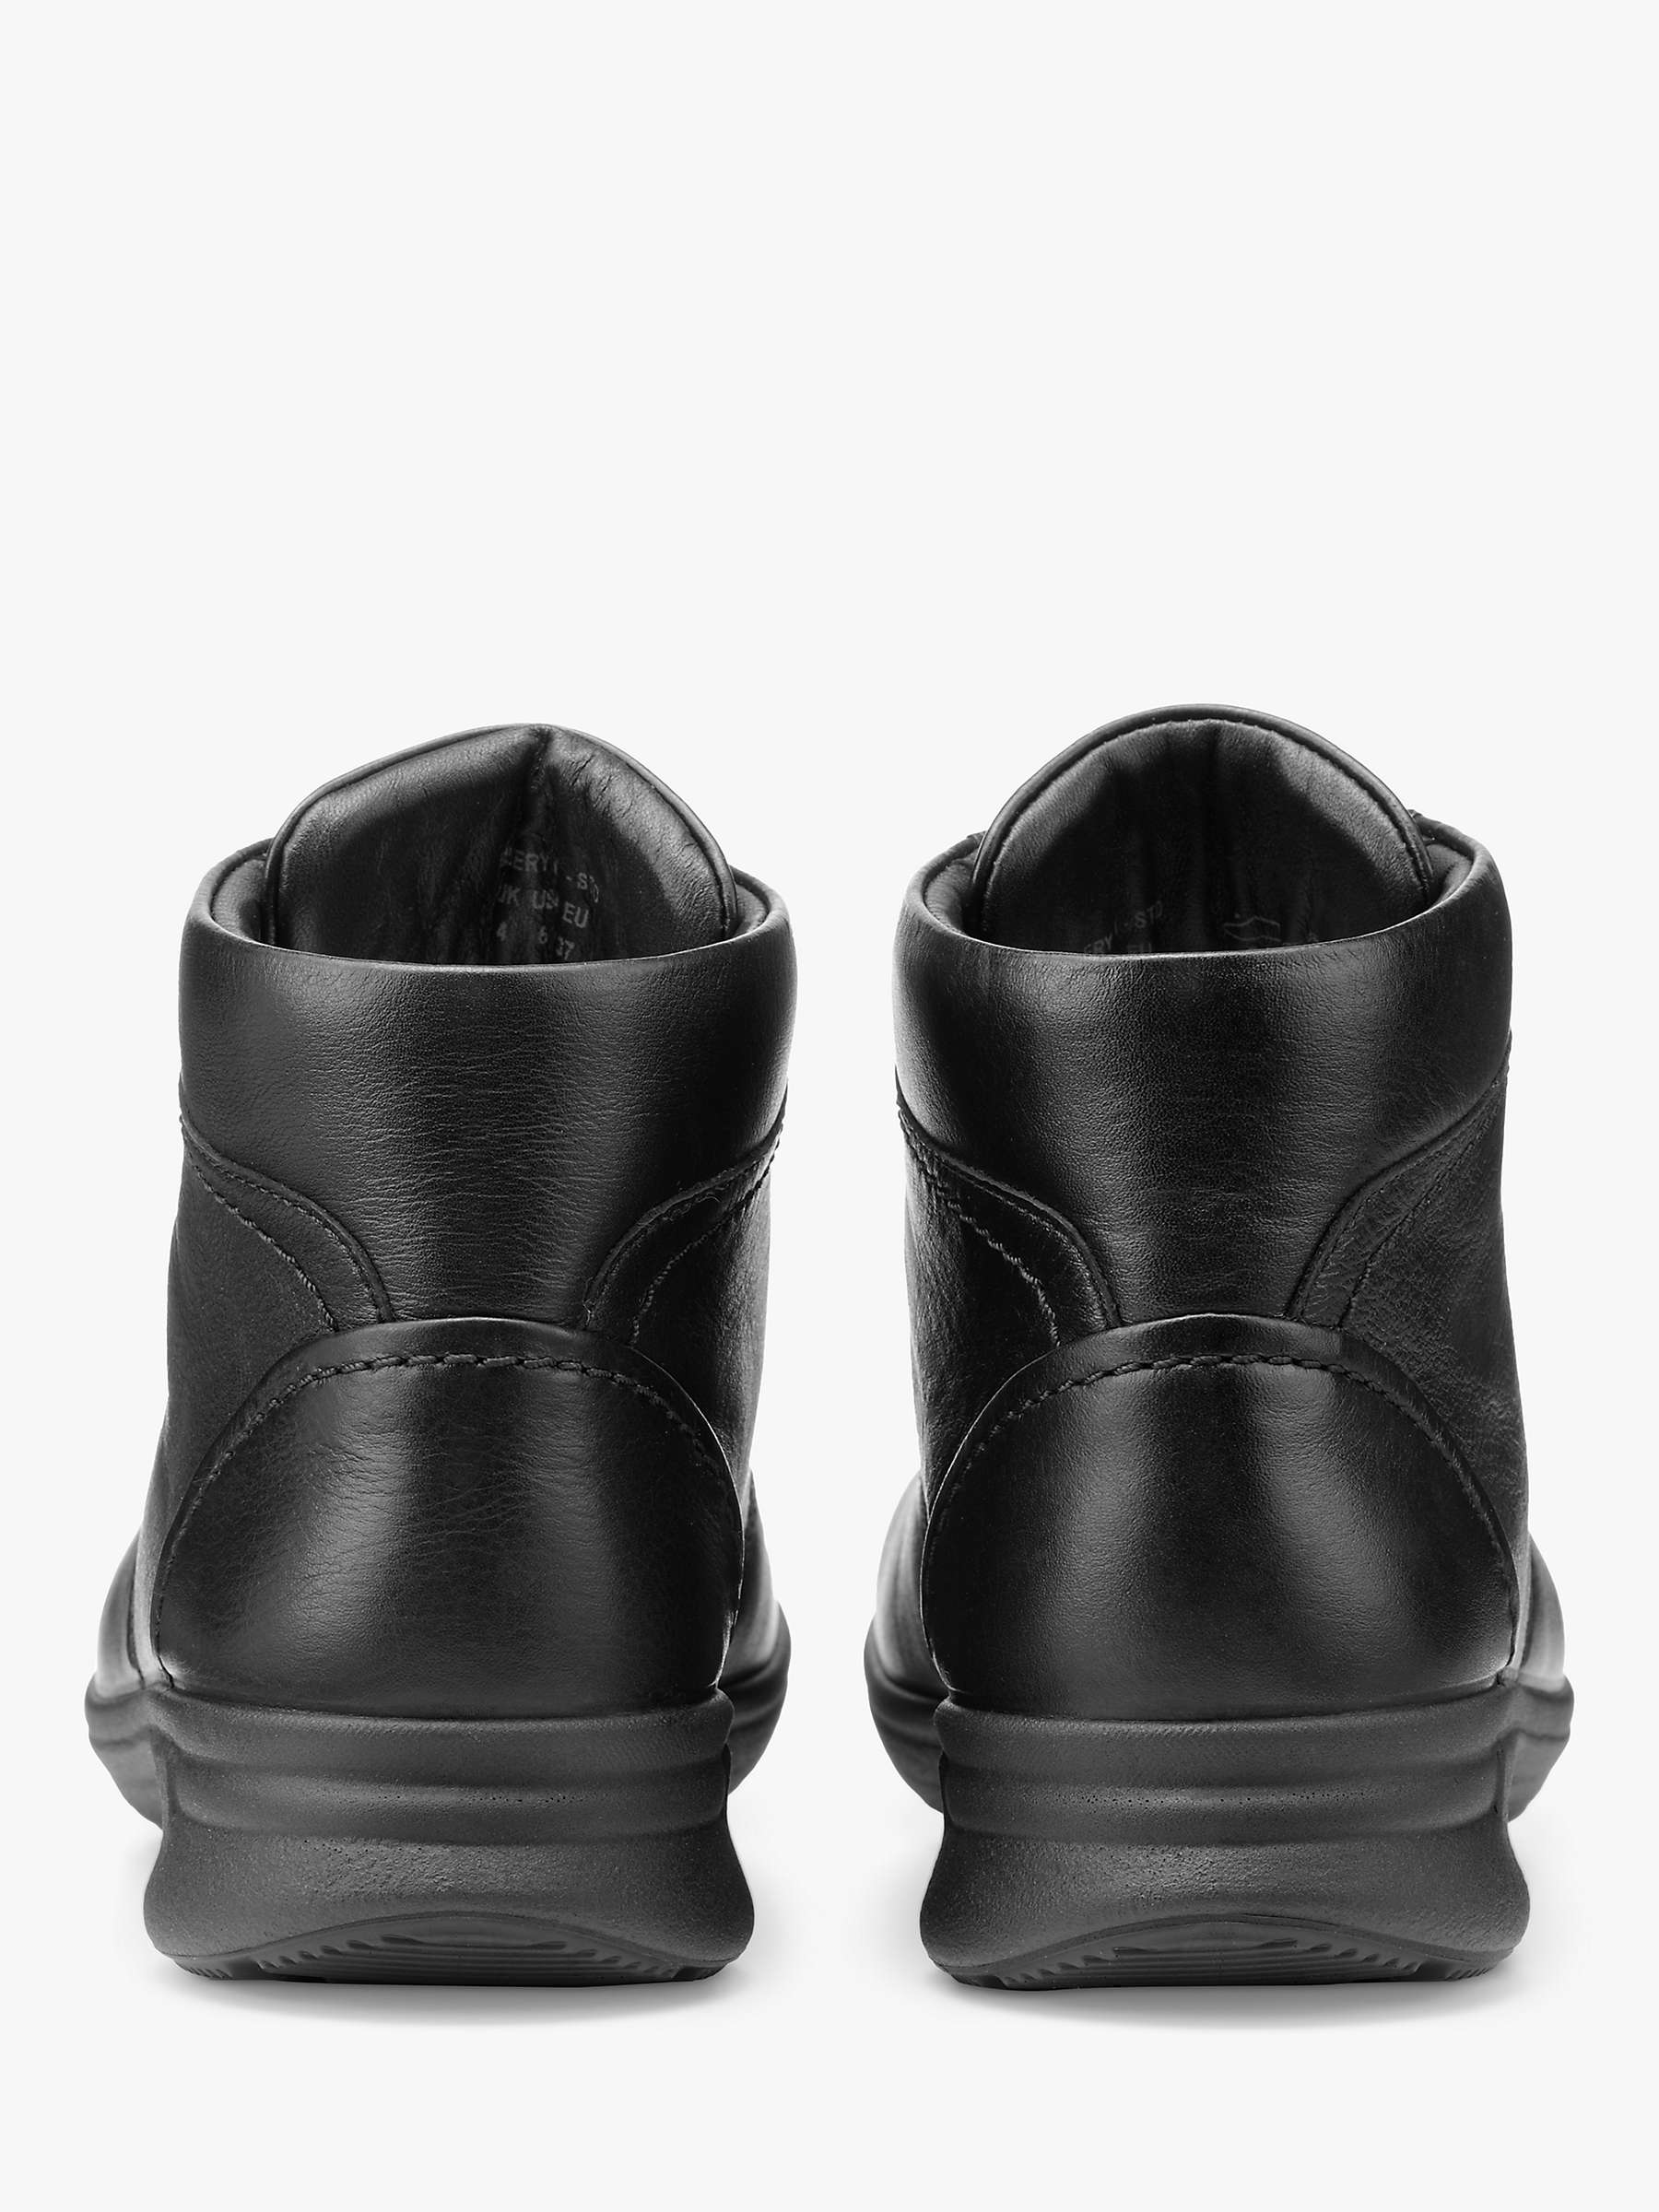 Hotter Ellery II Leather Wide Fit Lace Up Ankle Boots at John Lewis ...